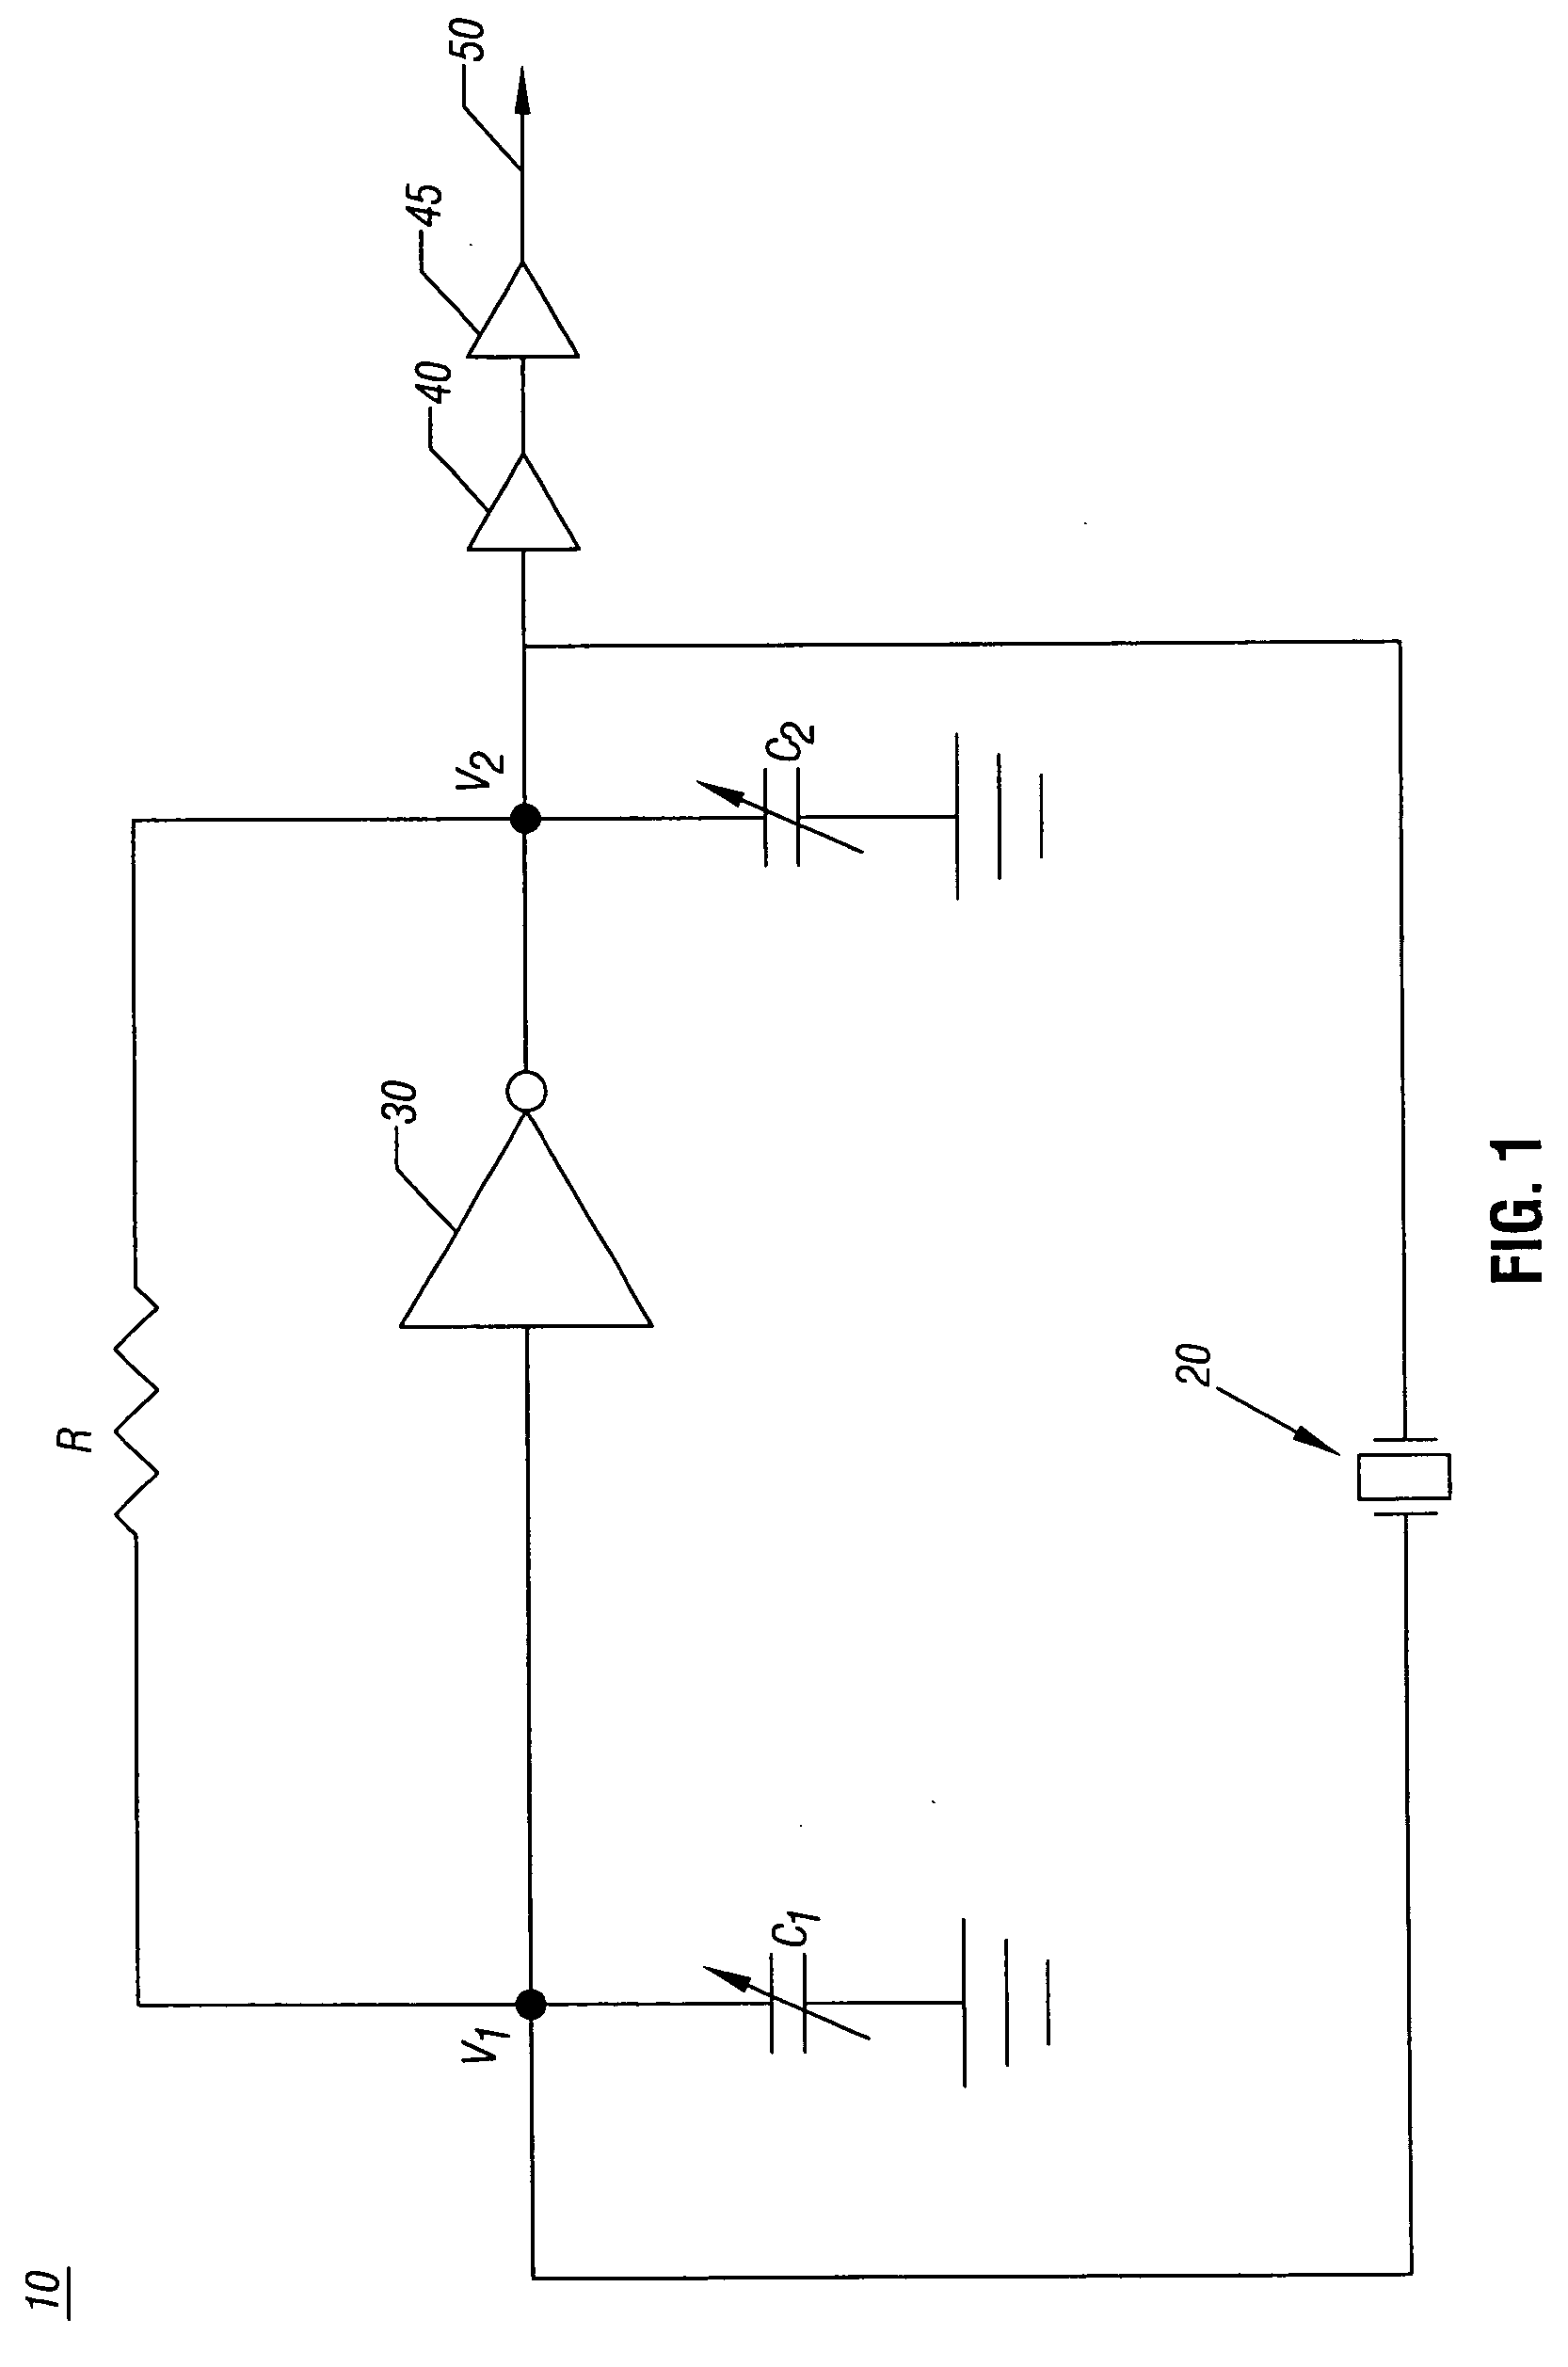 Clock circuit with programmable load capacitors